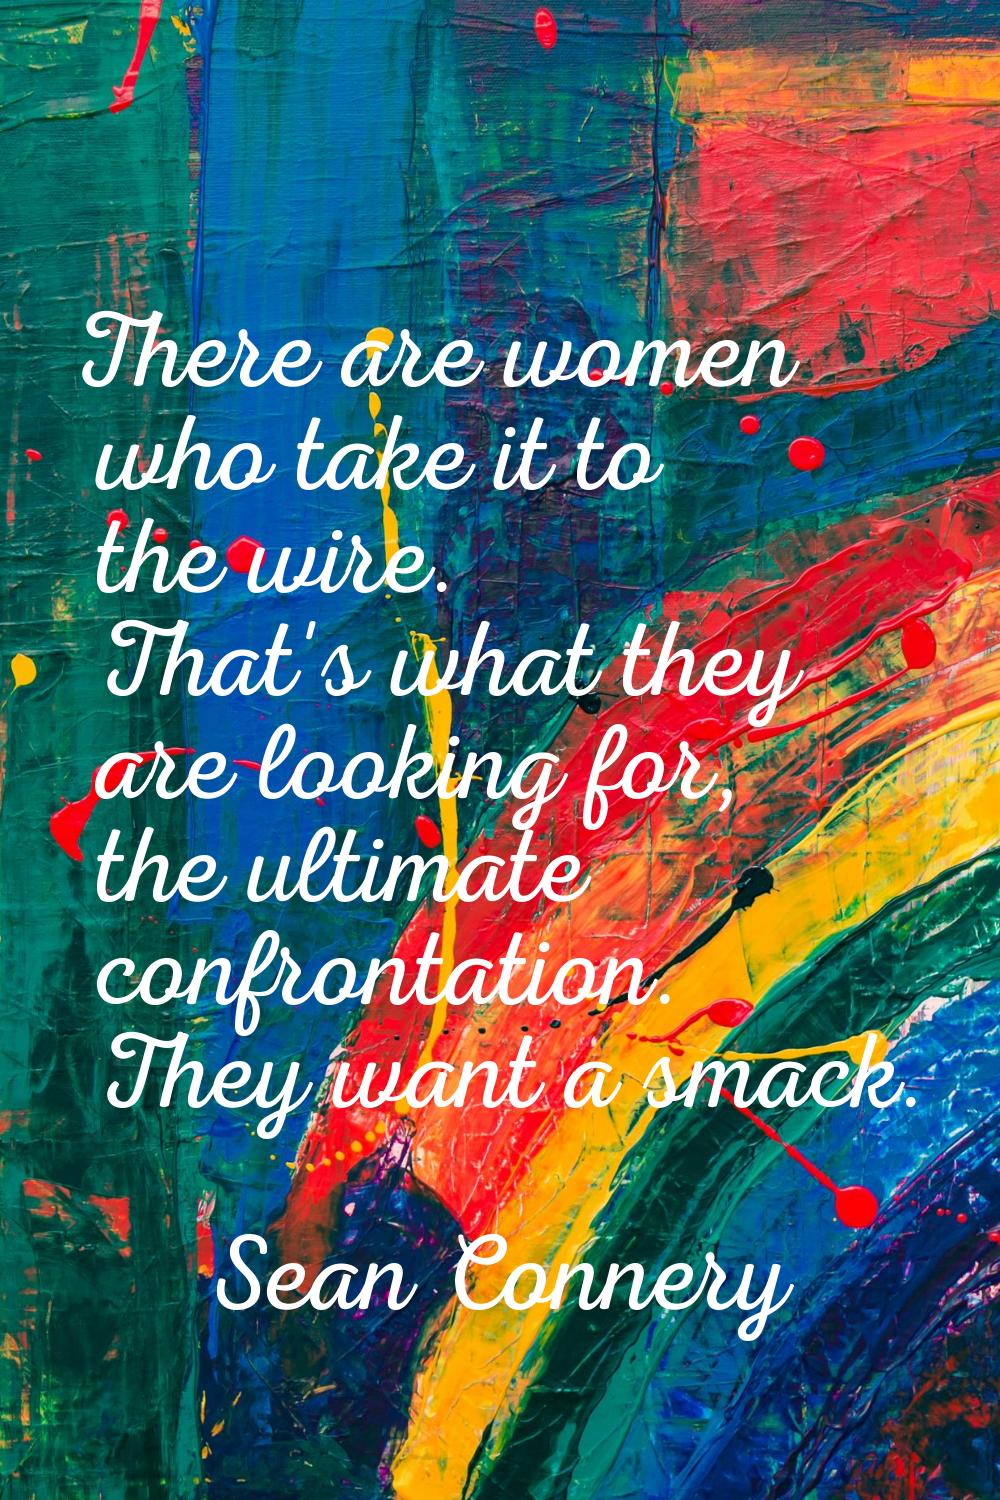 There are women who take it to the wire. That's what they are looking for, the ultimate confrontati